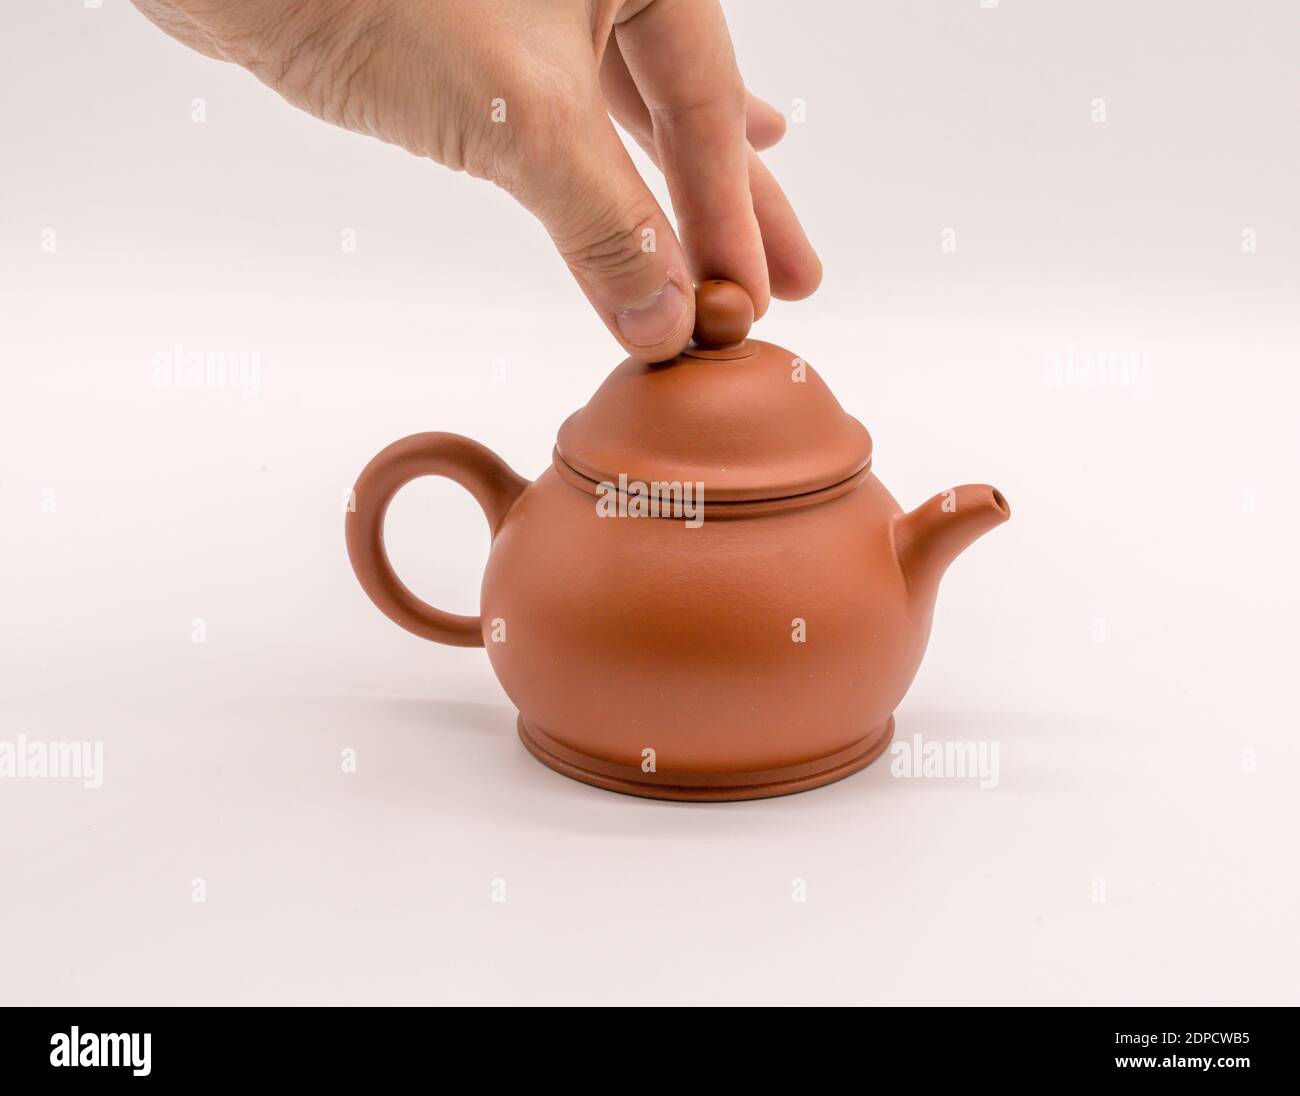 Cropped Hand Holding Lid Of Teapot Over White Background Stock Photo - Alamy